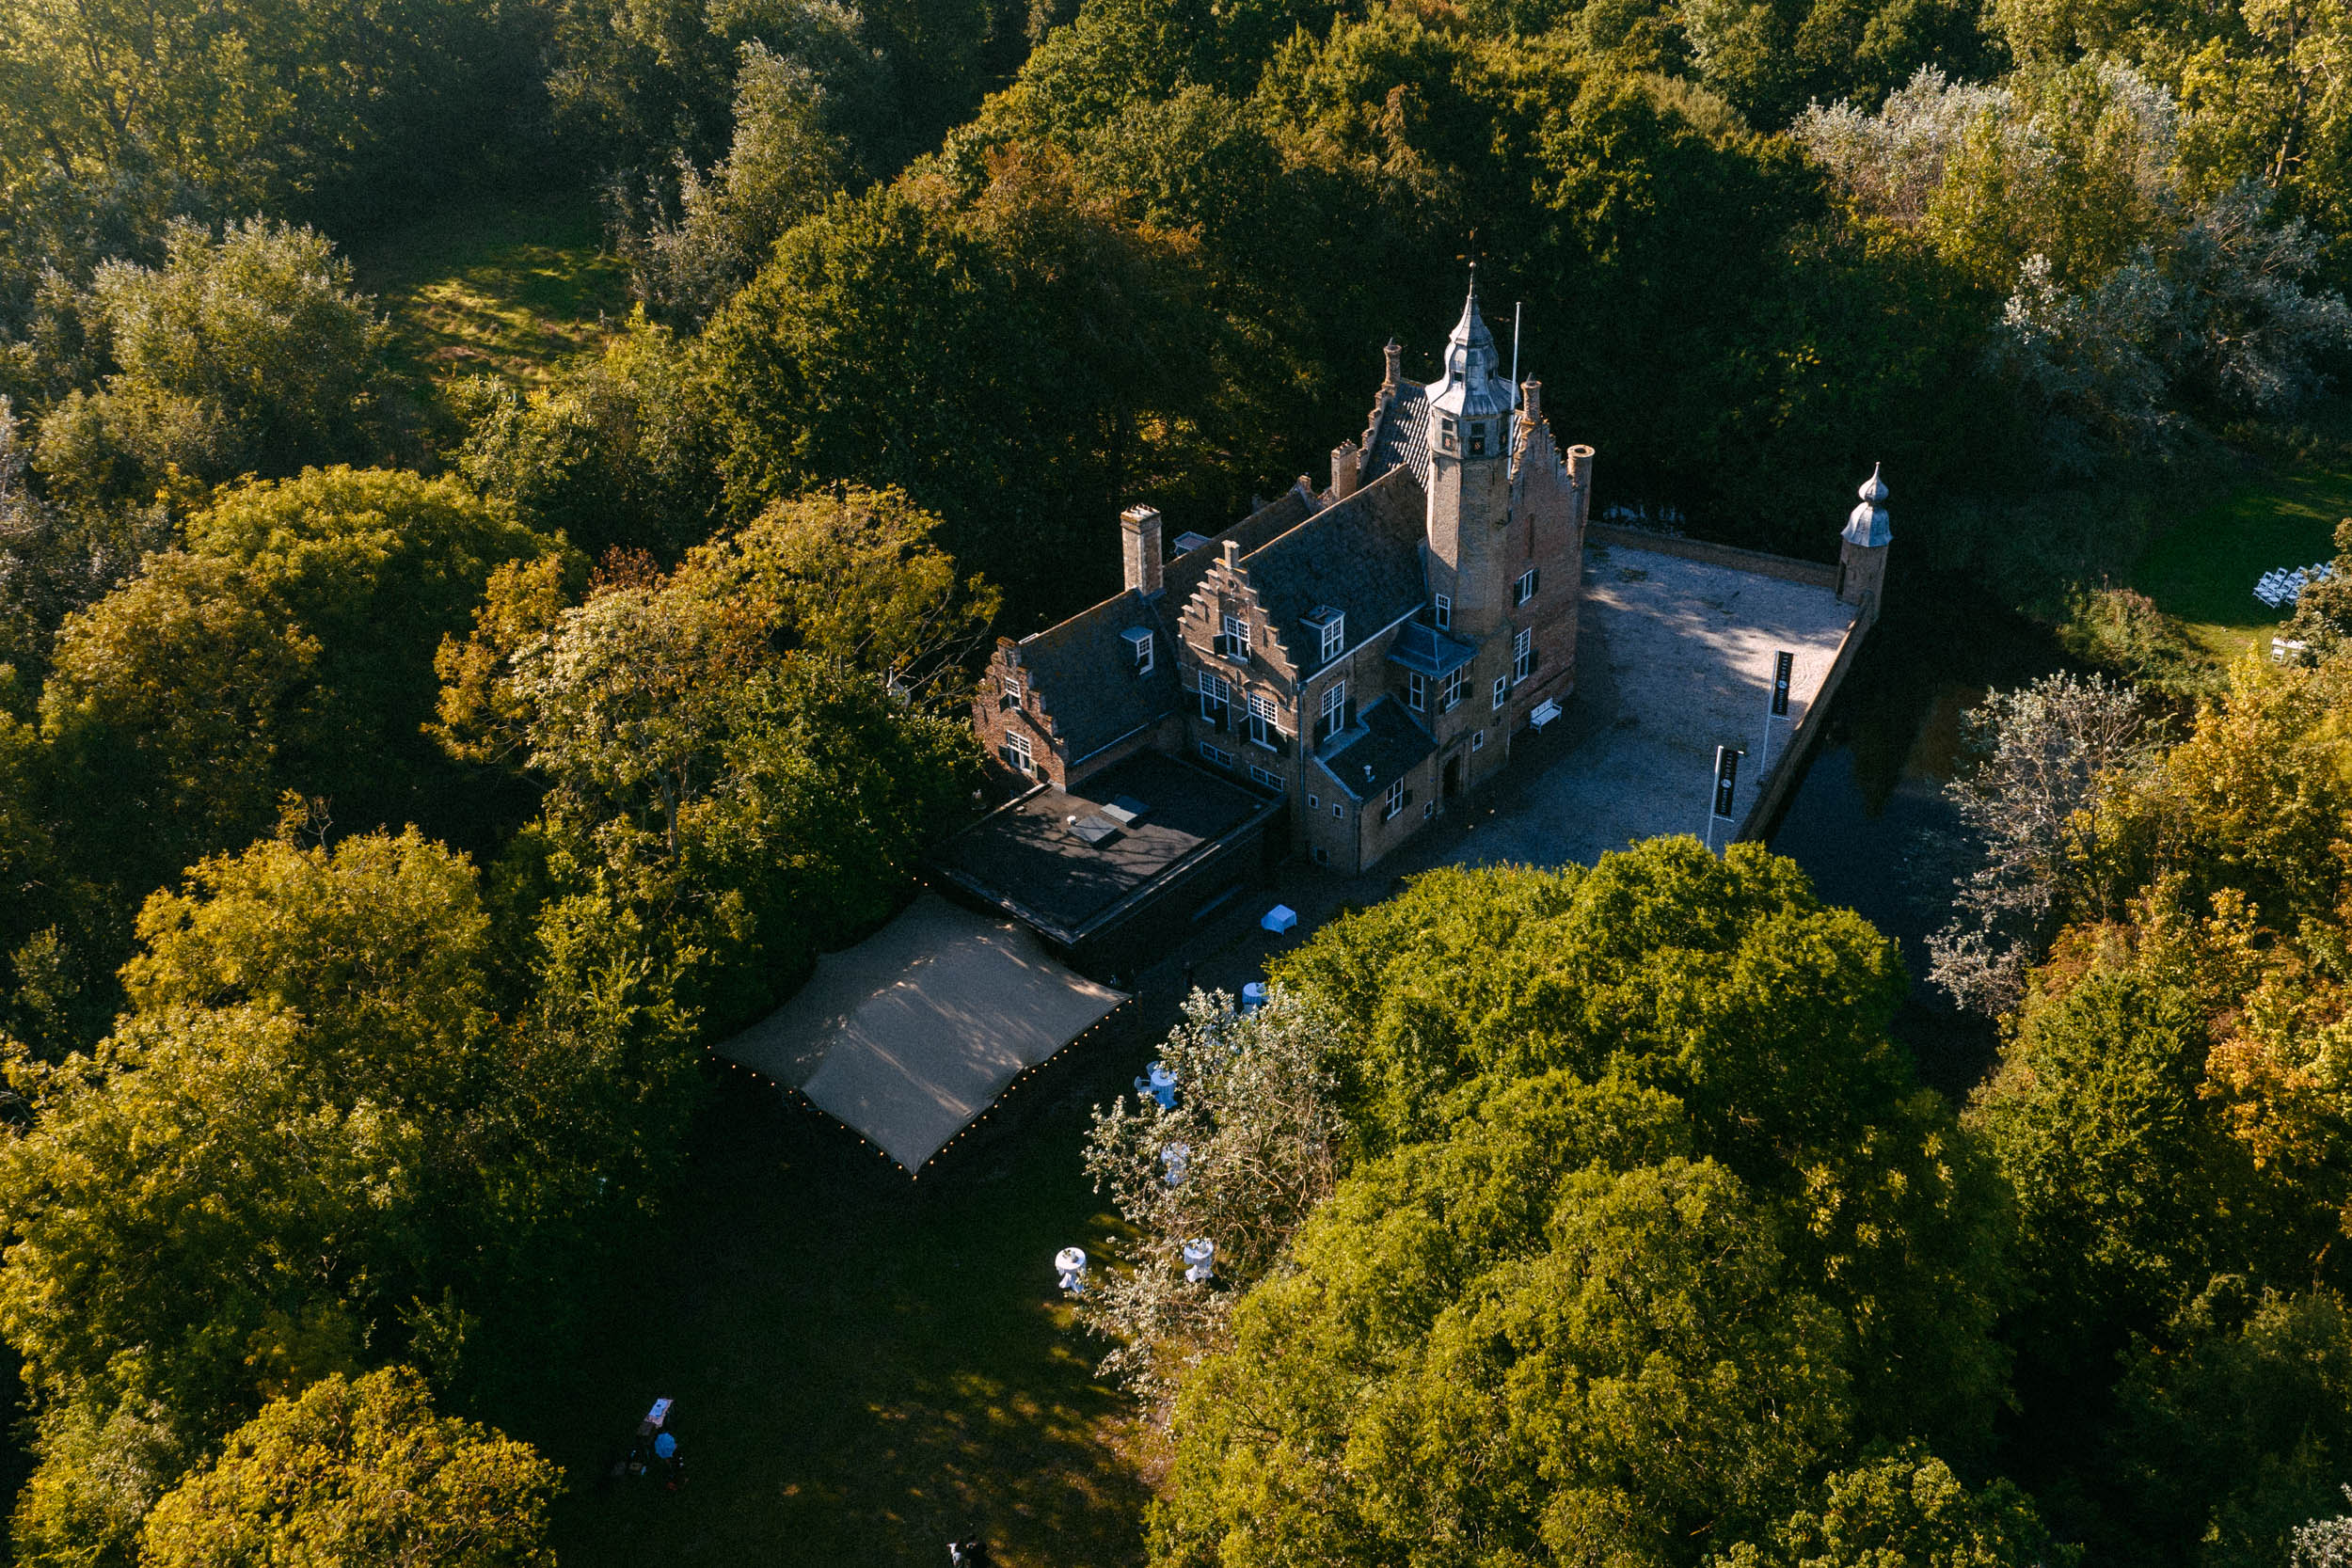 A castle wedding venue set amidst a lush forest, with breathtaking aerial views.